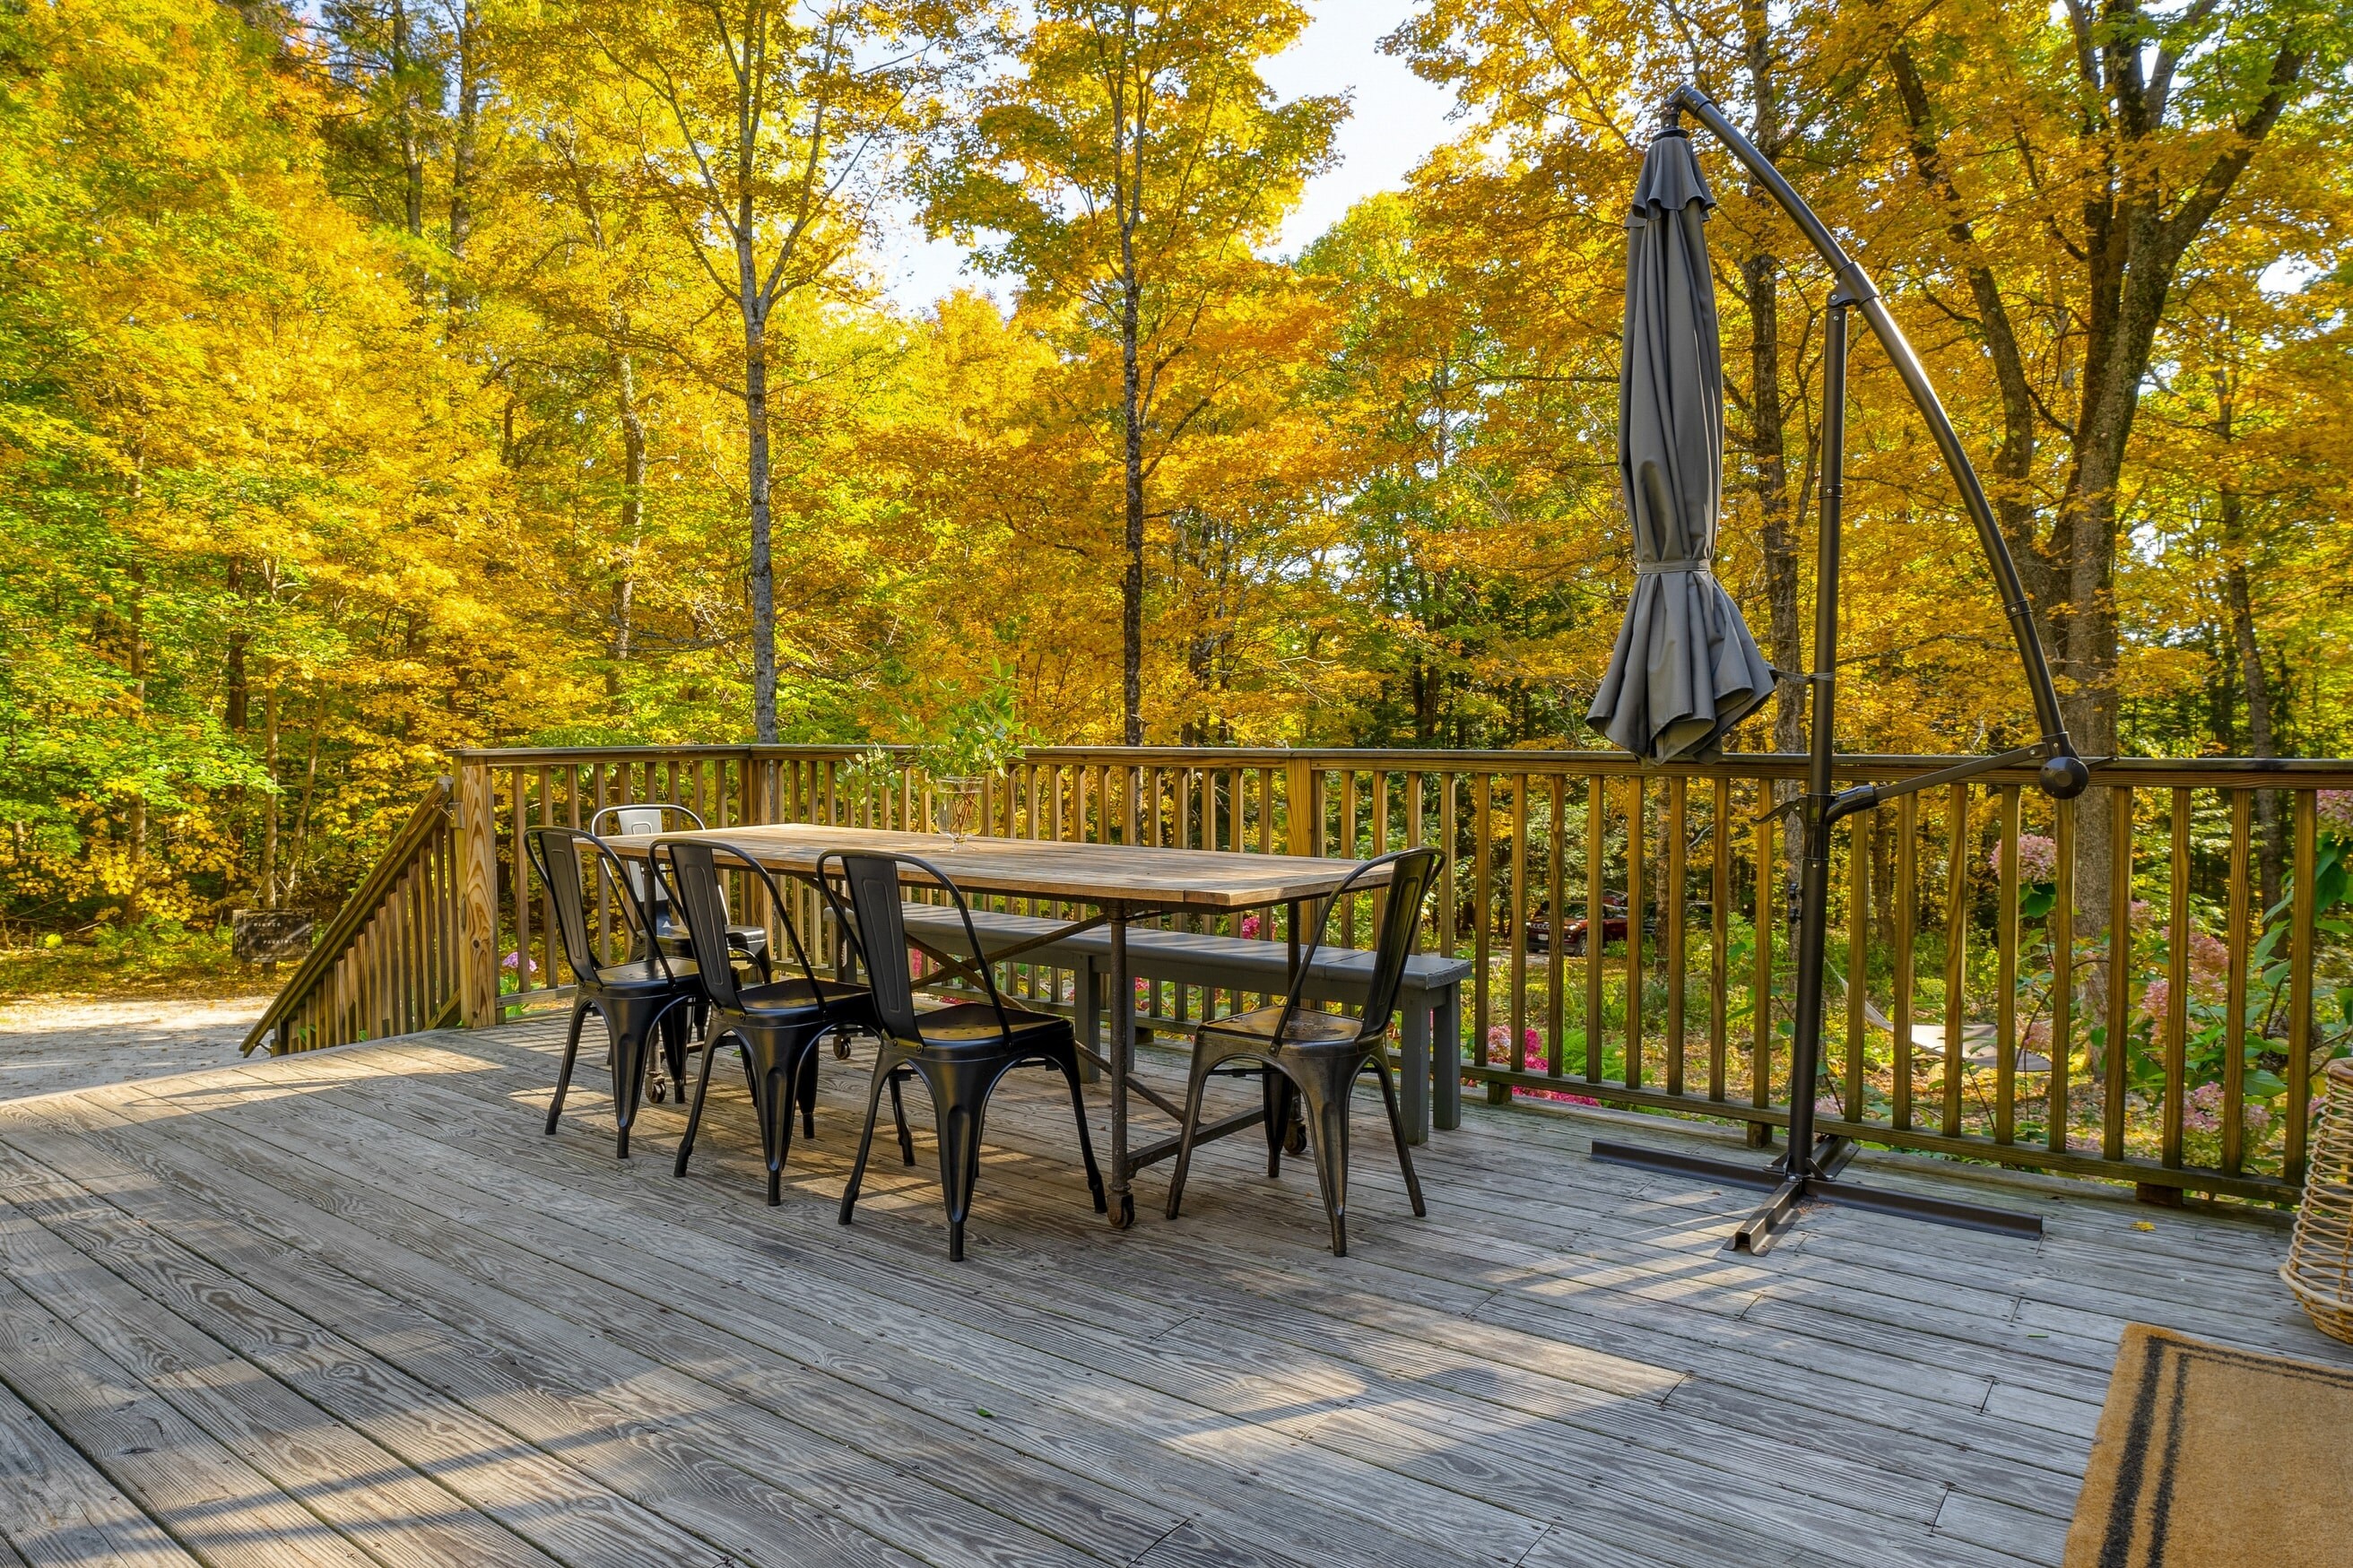 Large outdoor dining table is the perfect place for al fresco meals among the trees.